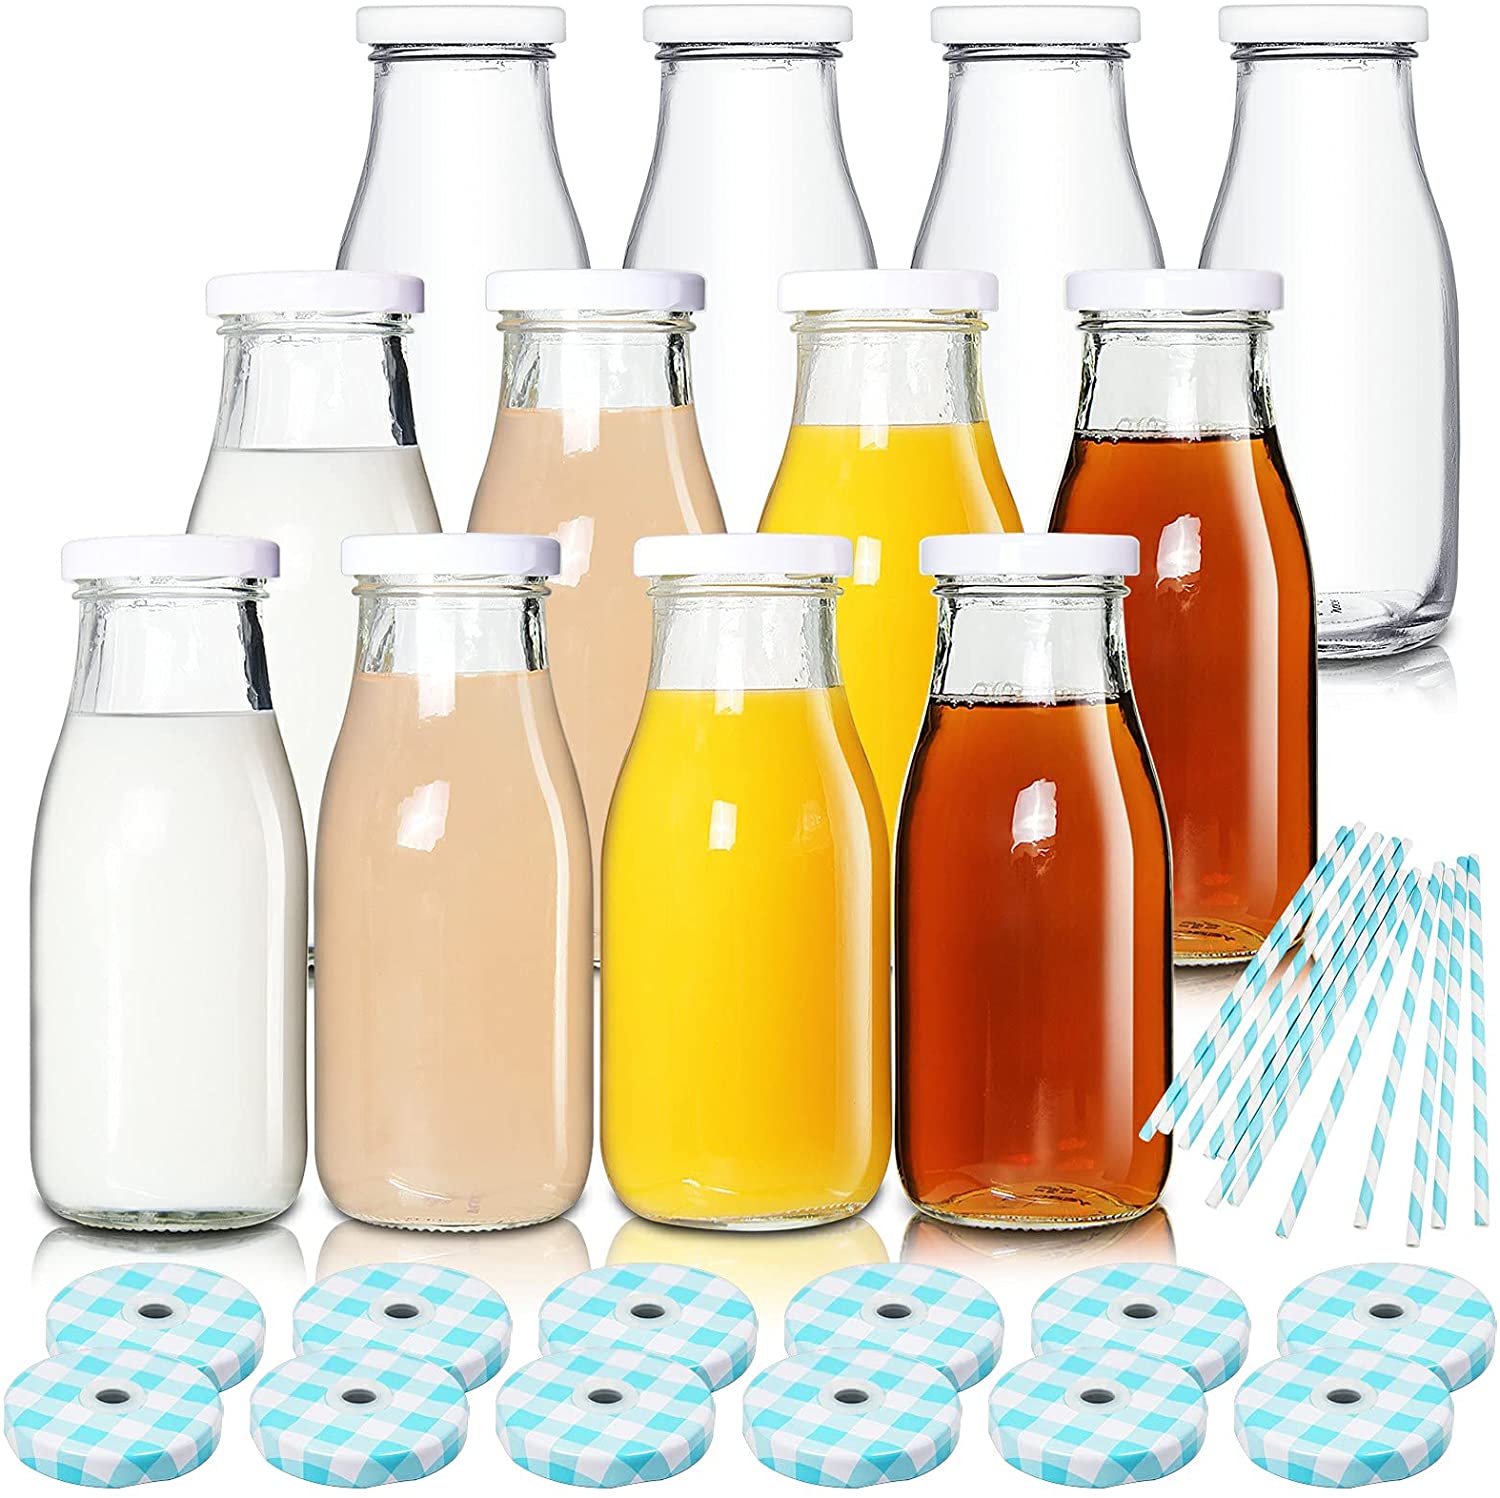 11oz Glass Milk Bottles with Reusable Metal Twist Lids and Straws for Beverage Glassware and Drinkware Parties